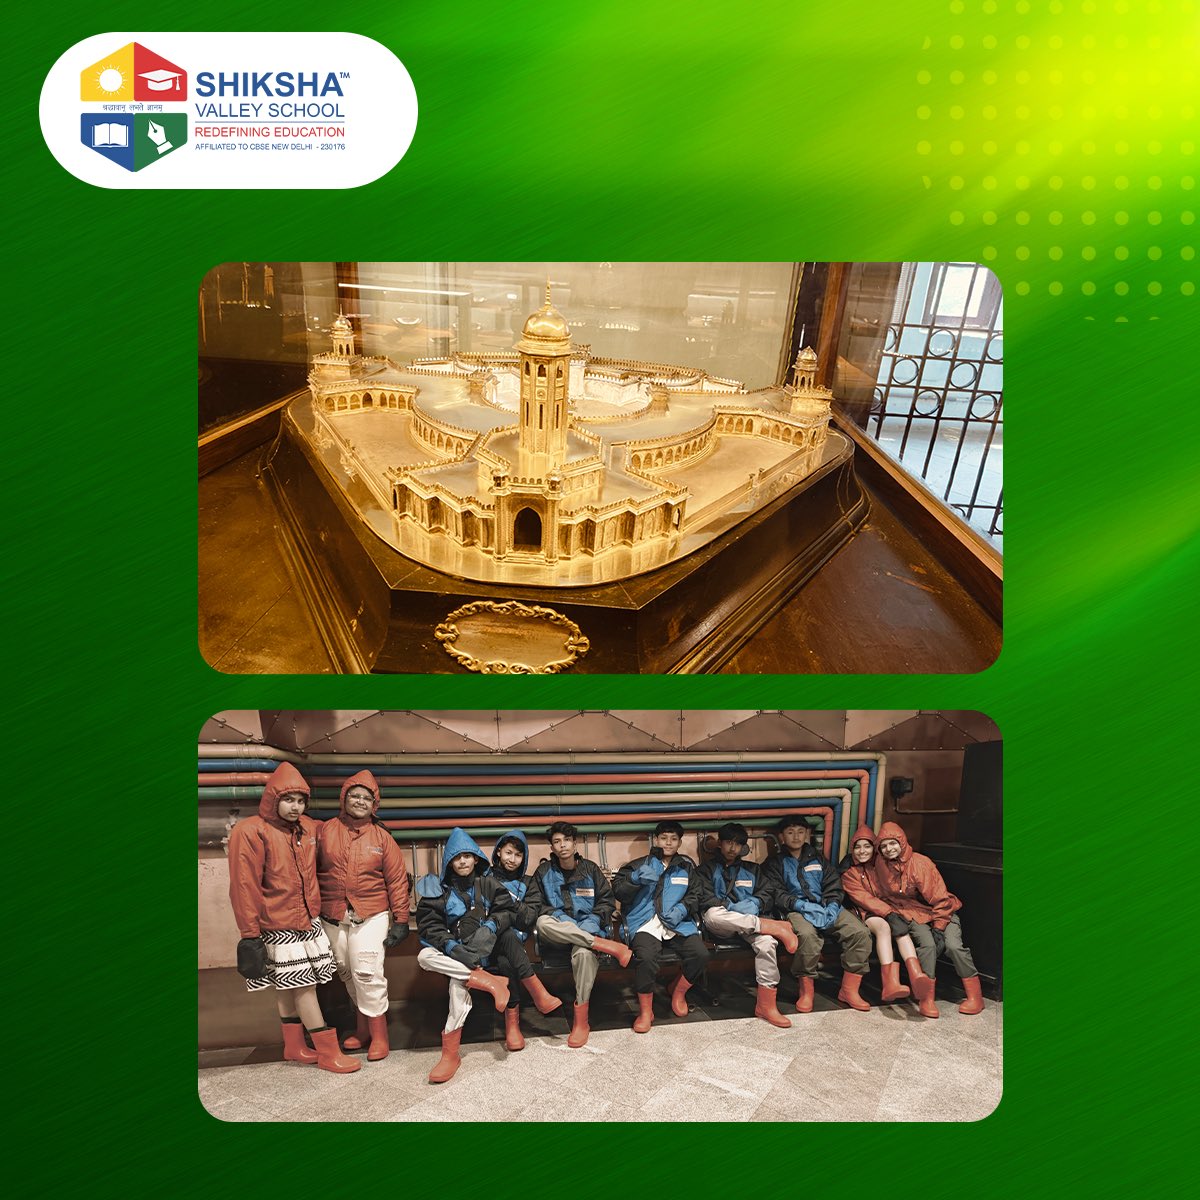 We delved into Hyderabad's rich history, visiting landmarks like the Statue of Equality, NTR Samadhi, and the iconic Charminar & more. 
#ShikshaValleySchool #SVS #BoardingSchool #Students #Education #India #Teaching #CBSEBoard #HyderabadTrip #SchoolTrip #EducationalTour